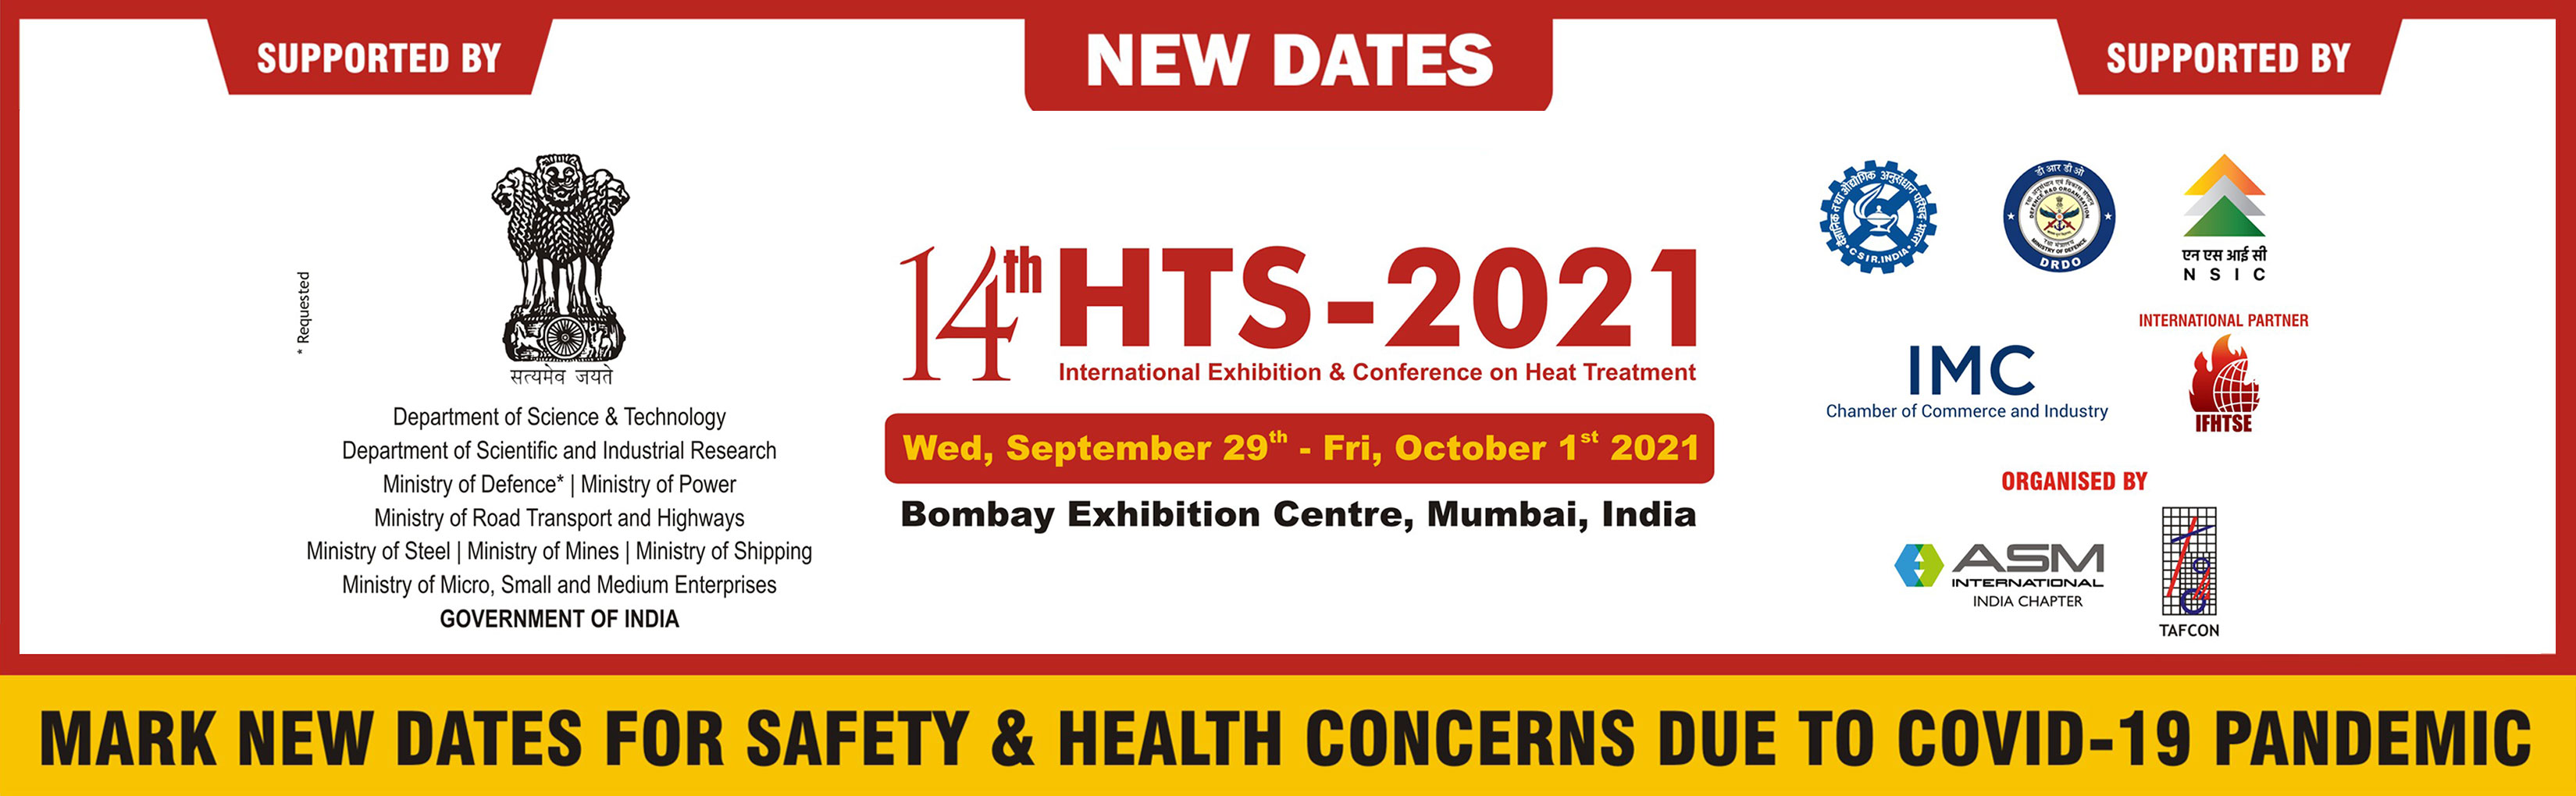 International Exhibition & Conference on Heat Treatment